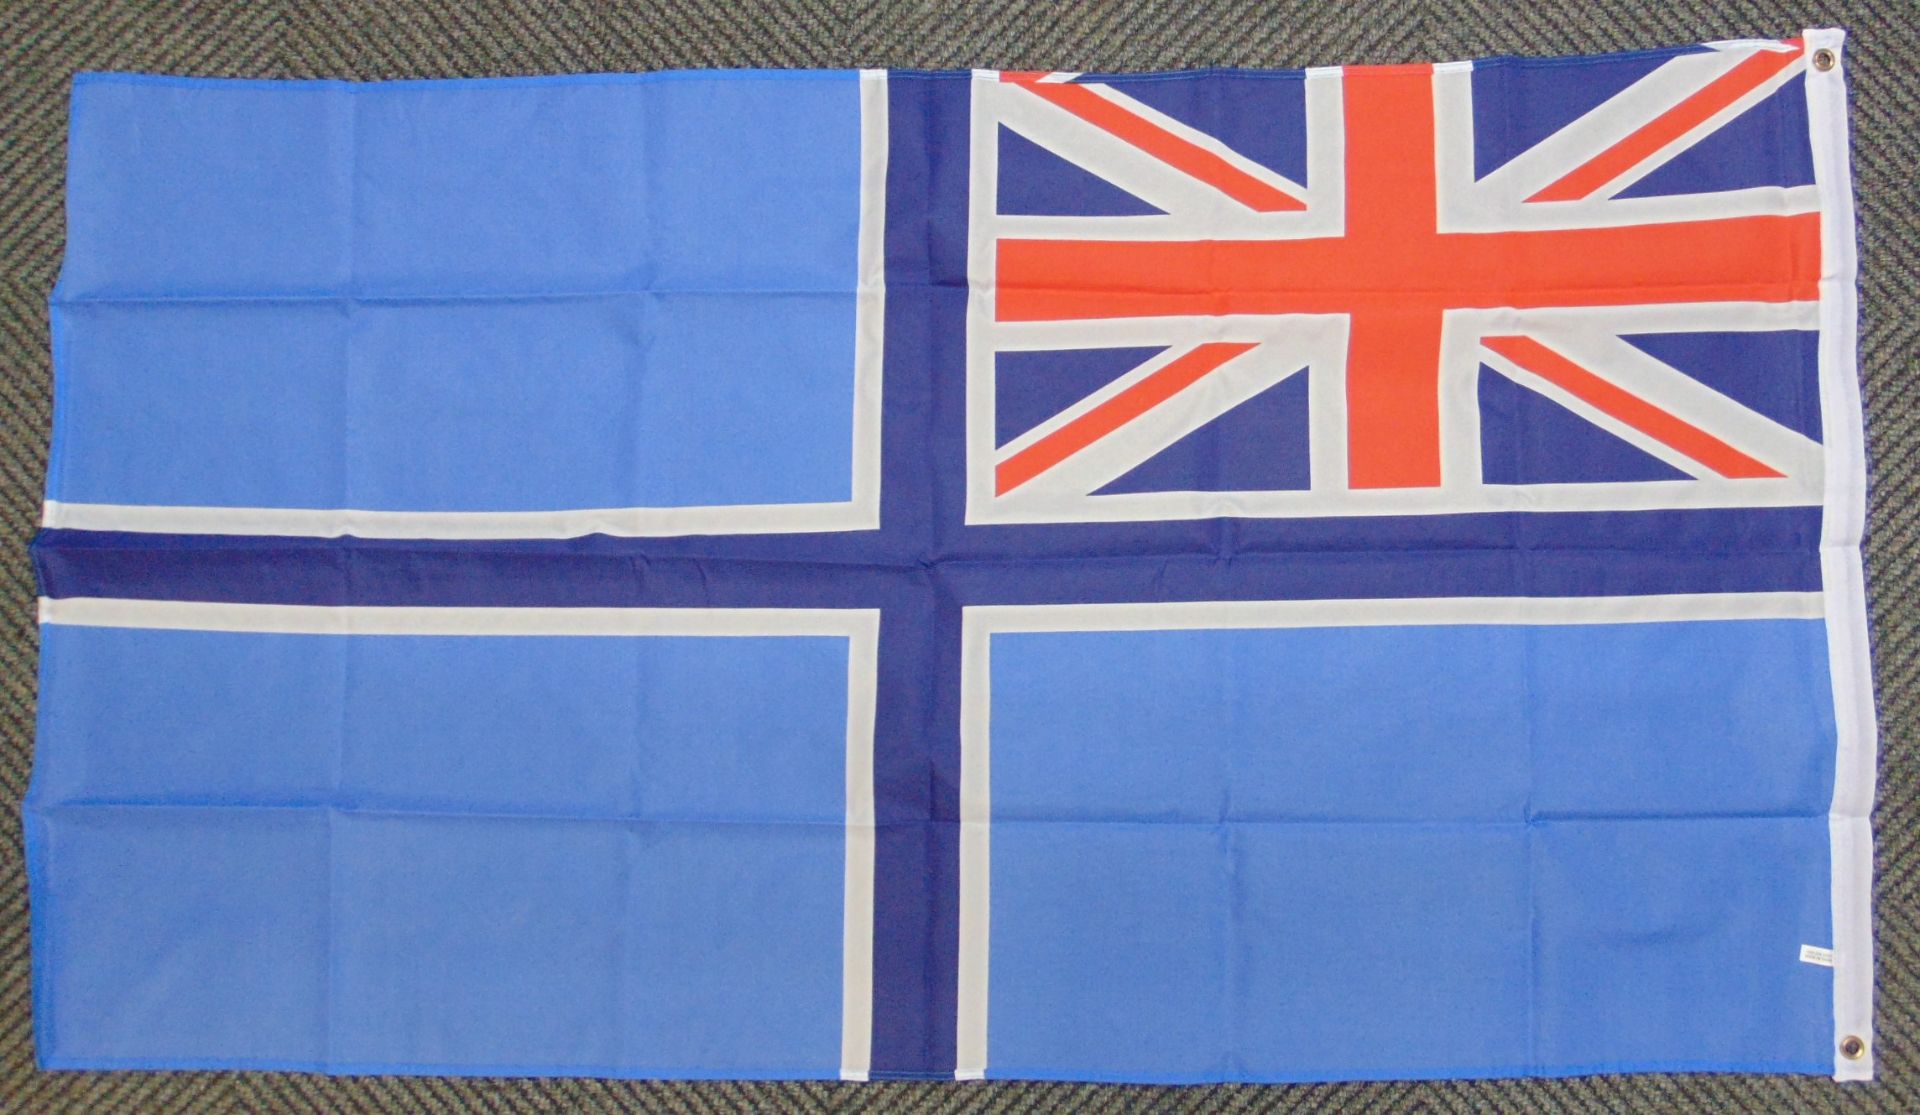 Civil Air Ensign Flag - 5ft x 3ft with Metal Eyelets - Image 2 of 4